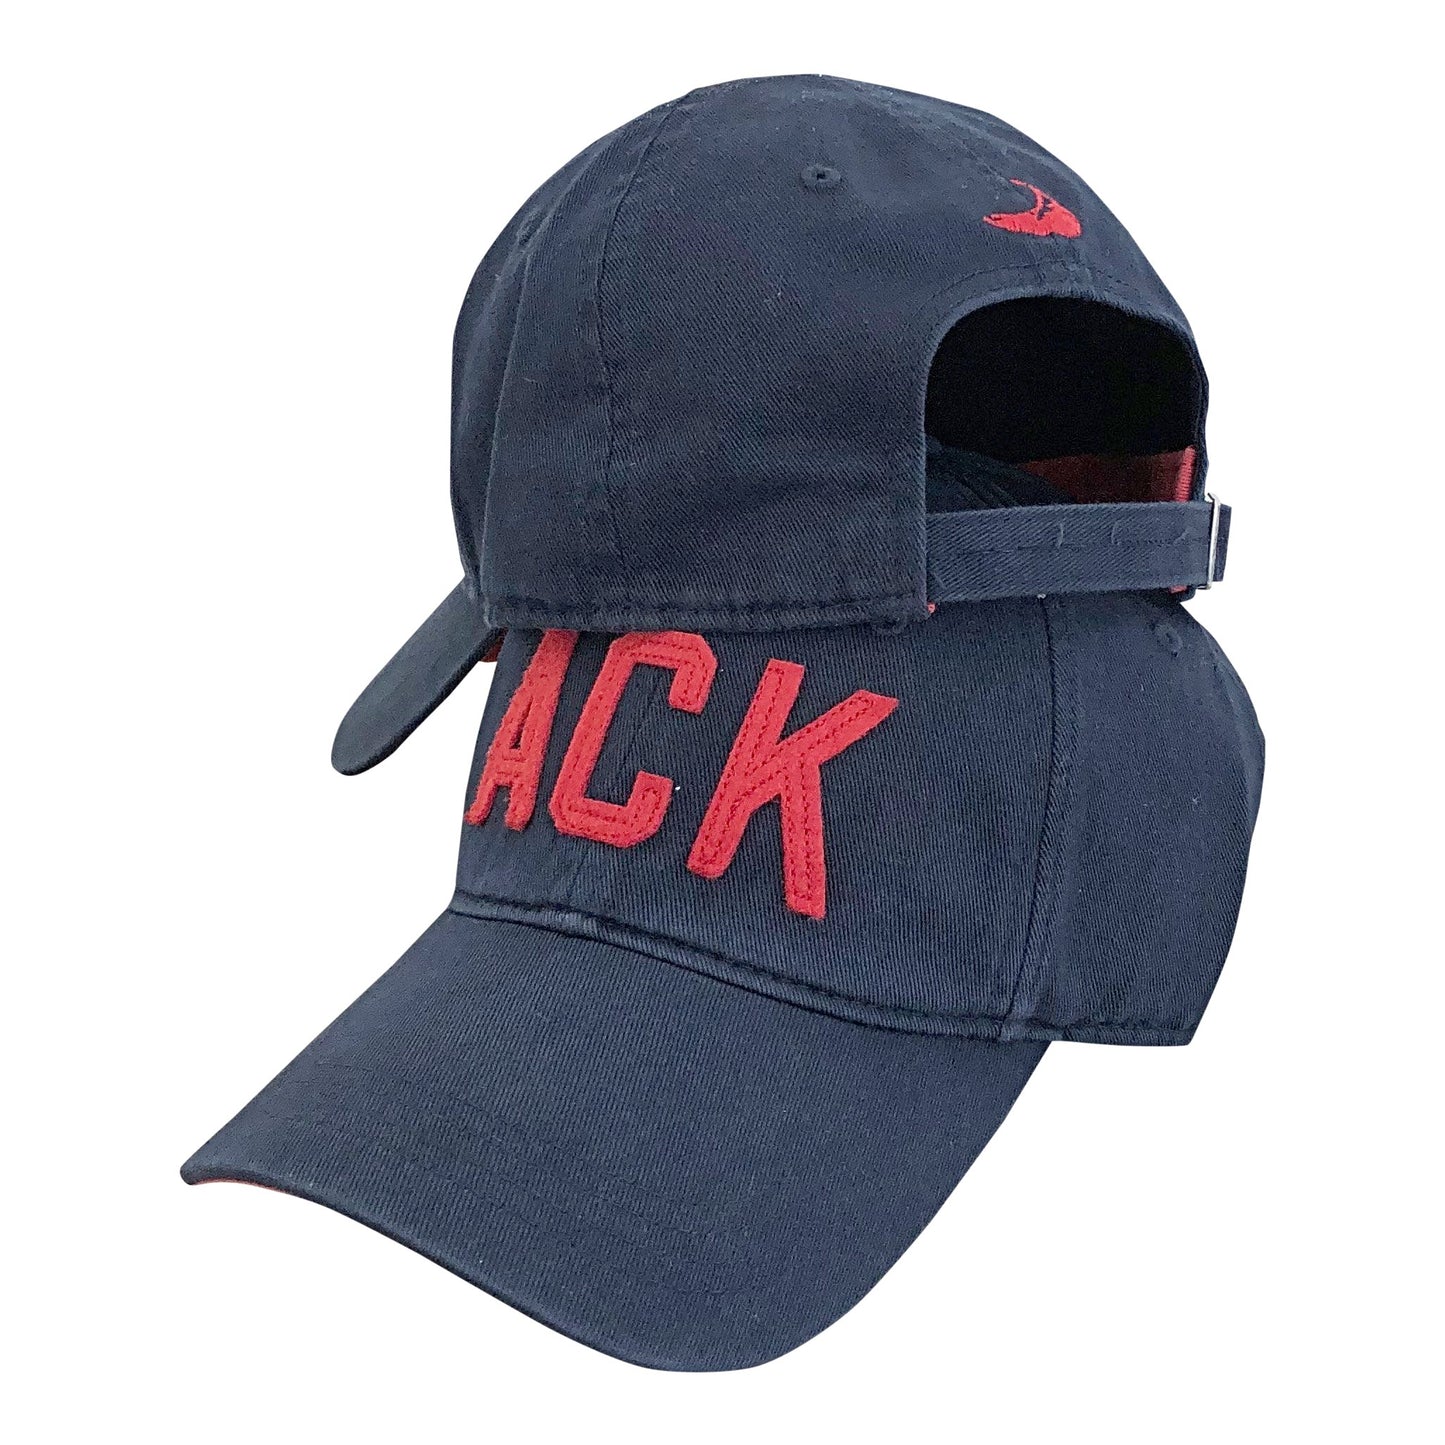 ACK Nantucket Island Applique Washed Twill Hat